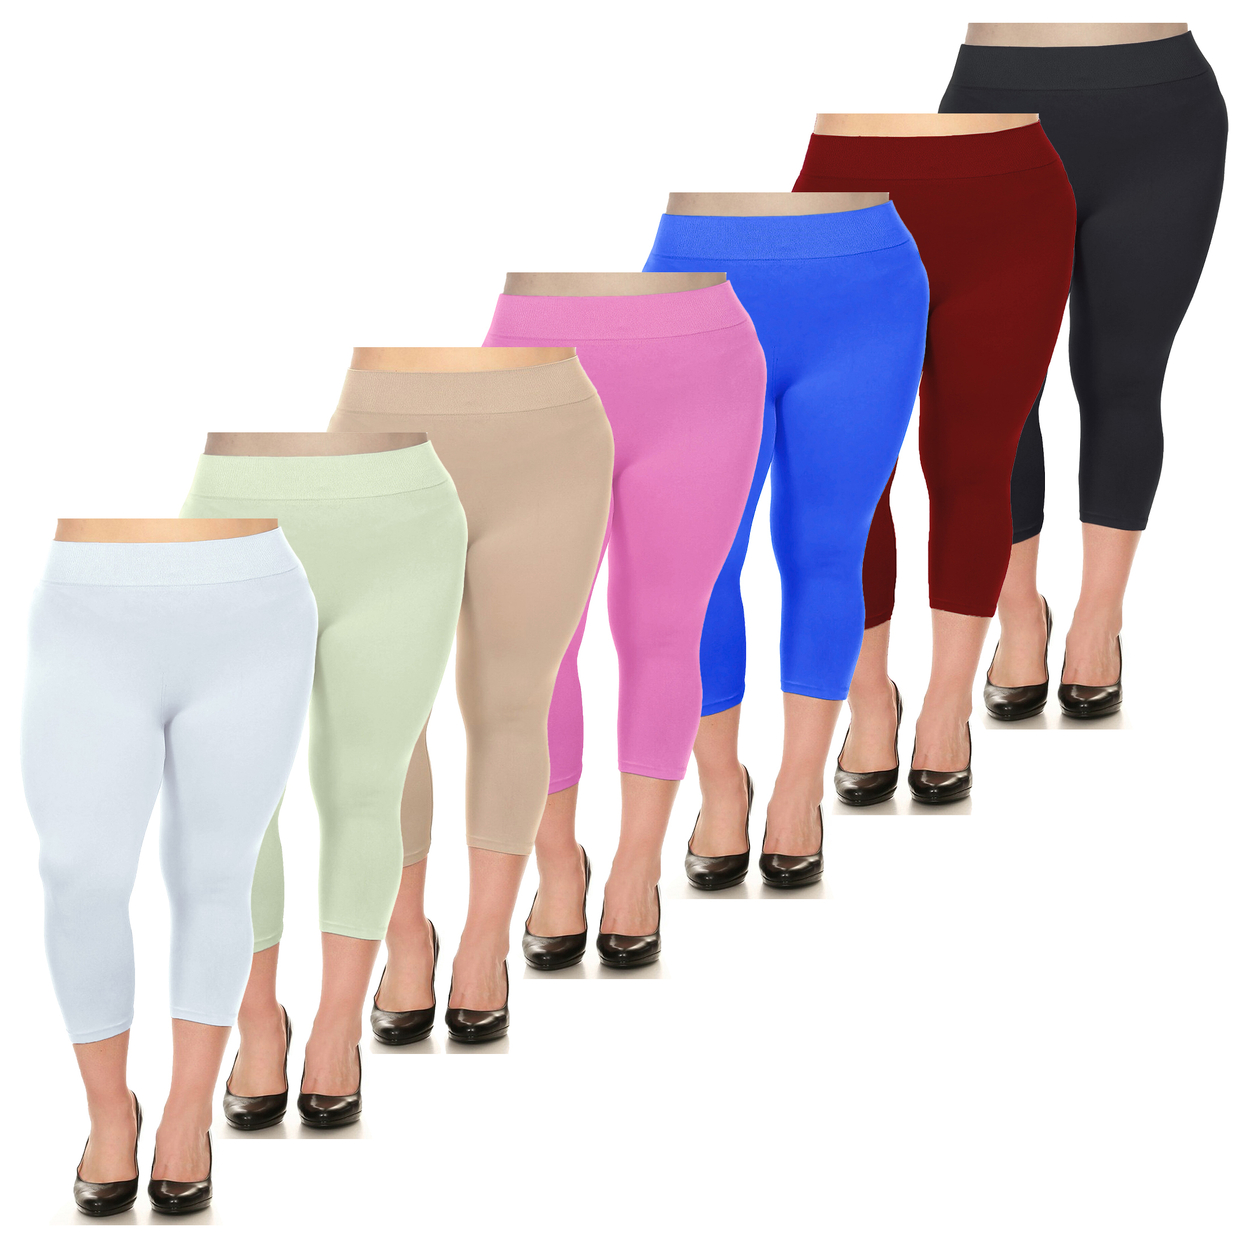 2-Pack: Women's Ultra-Soft High Waisted Smooth Stretch Active Yoga Capri Leggings Plus Size Available - Beige & Red, 3x